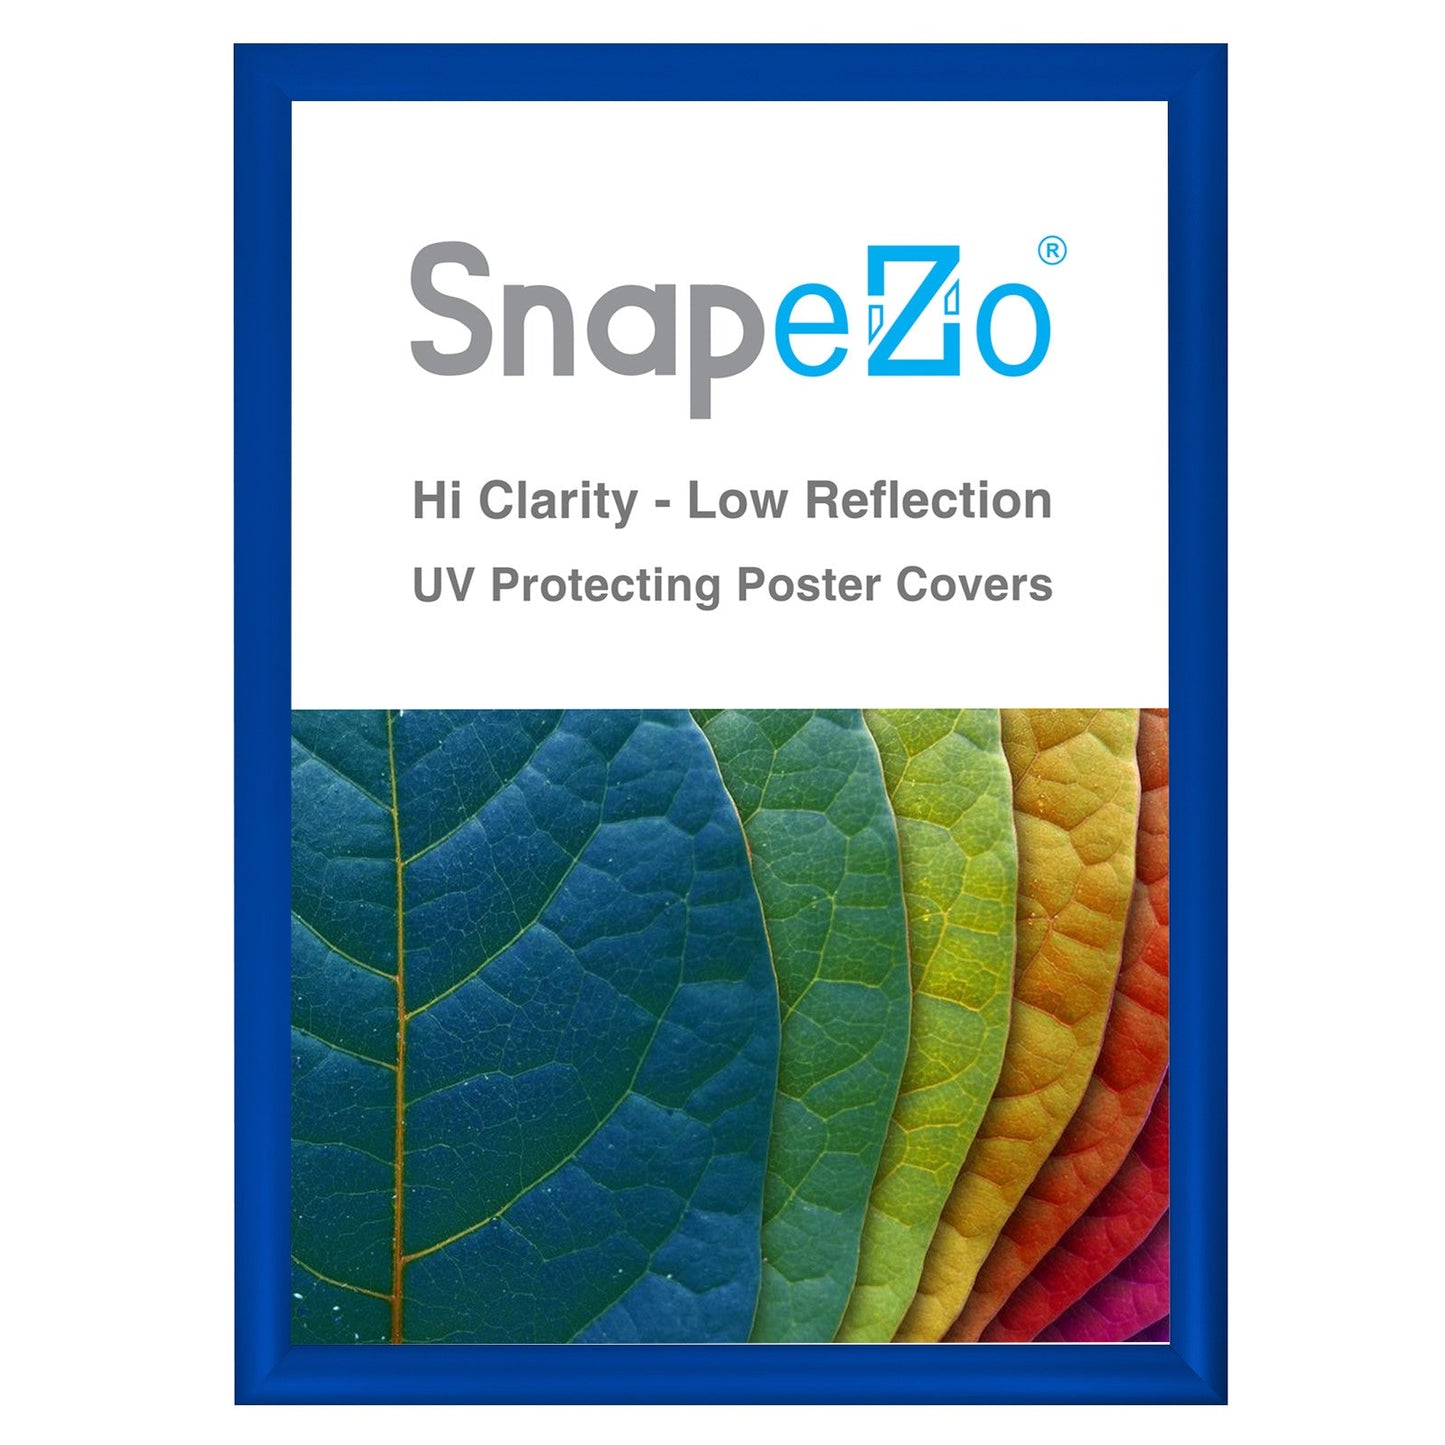 Load image into Gallery viewer, A3 Blue SnapeZo® Snap Frame - 1.2&amp;quot; Profile
